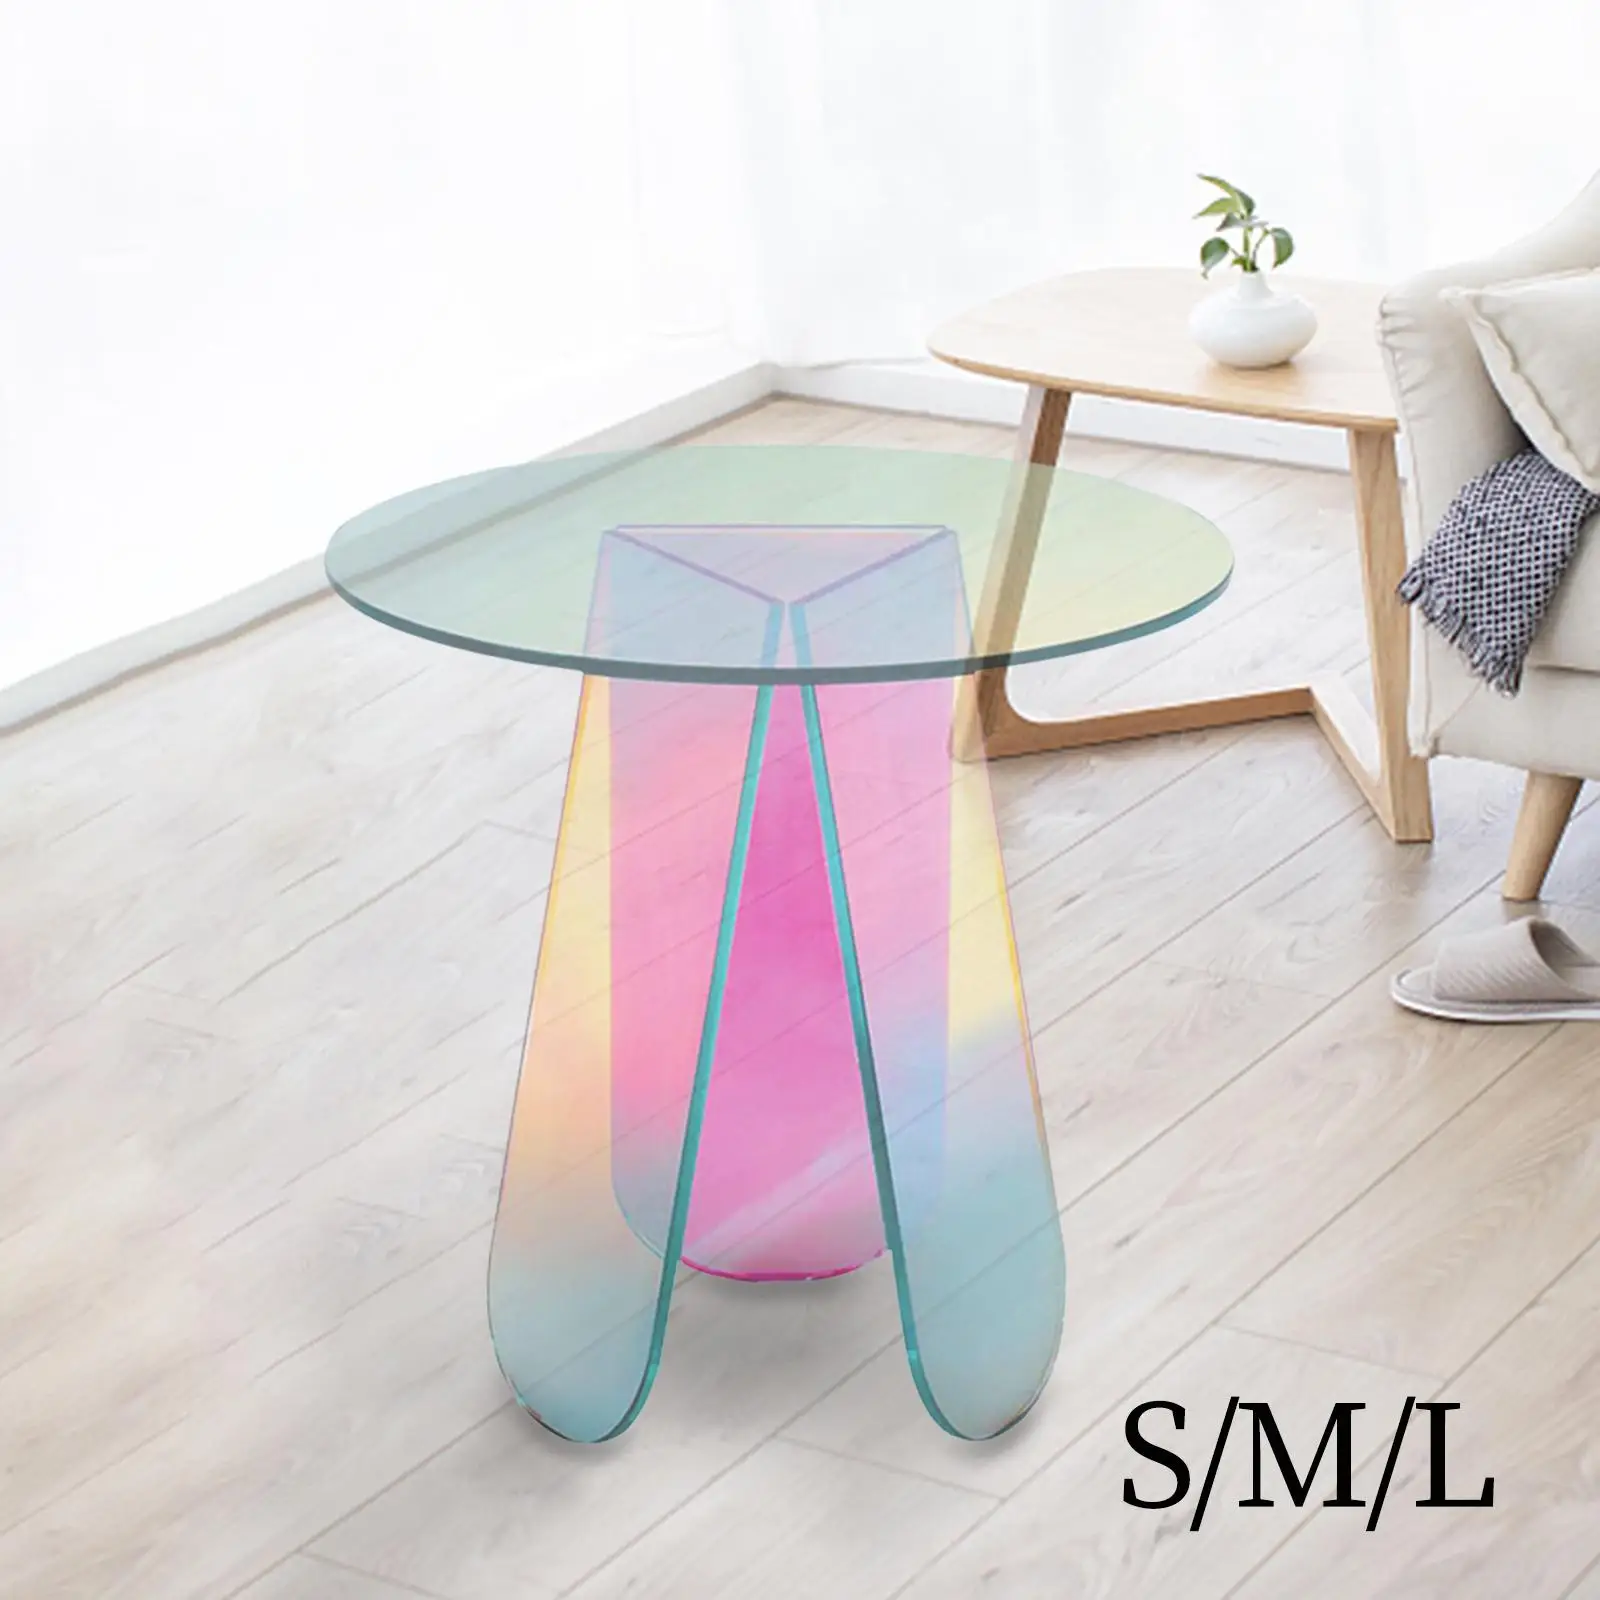 DIY Acrylic Coffee Table End Table Iridescent Assembly Side Table Round Modern for Living Space Bedside Tables NightStand